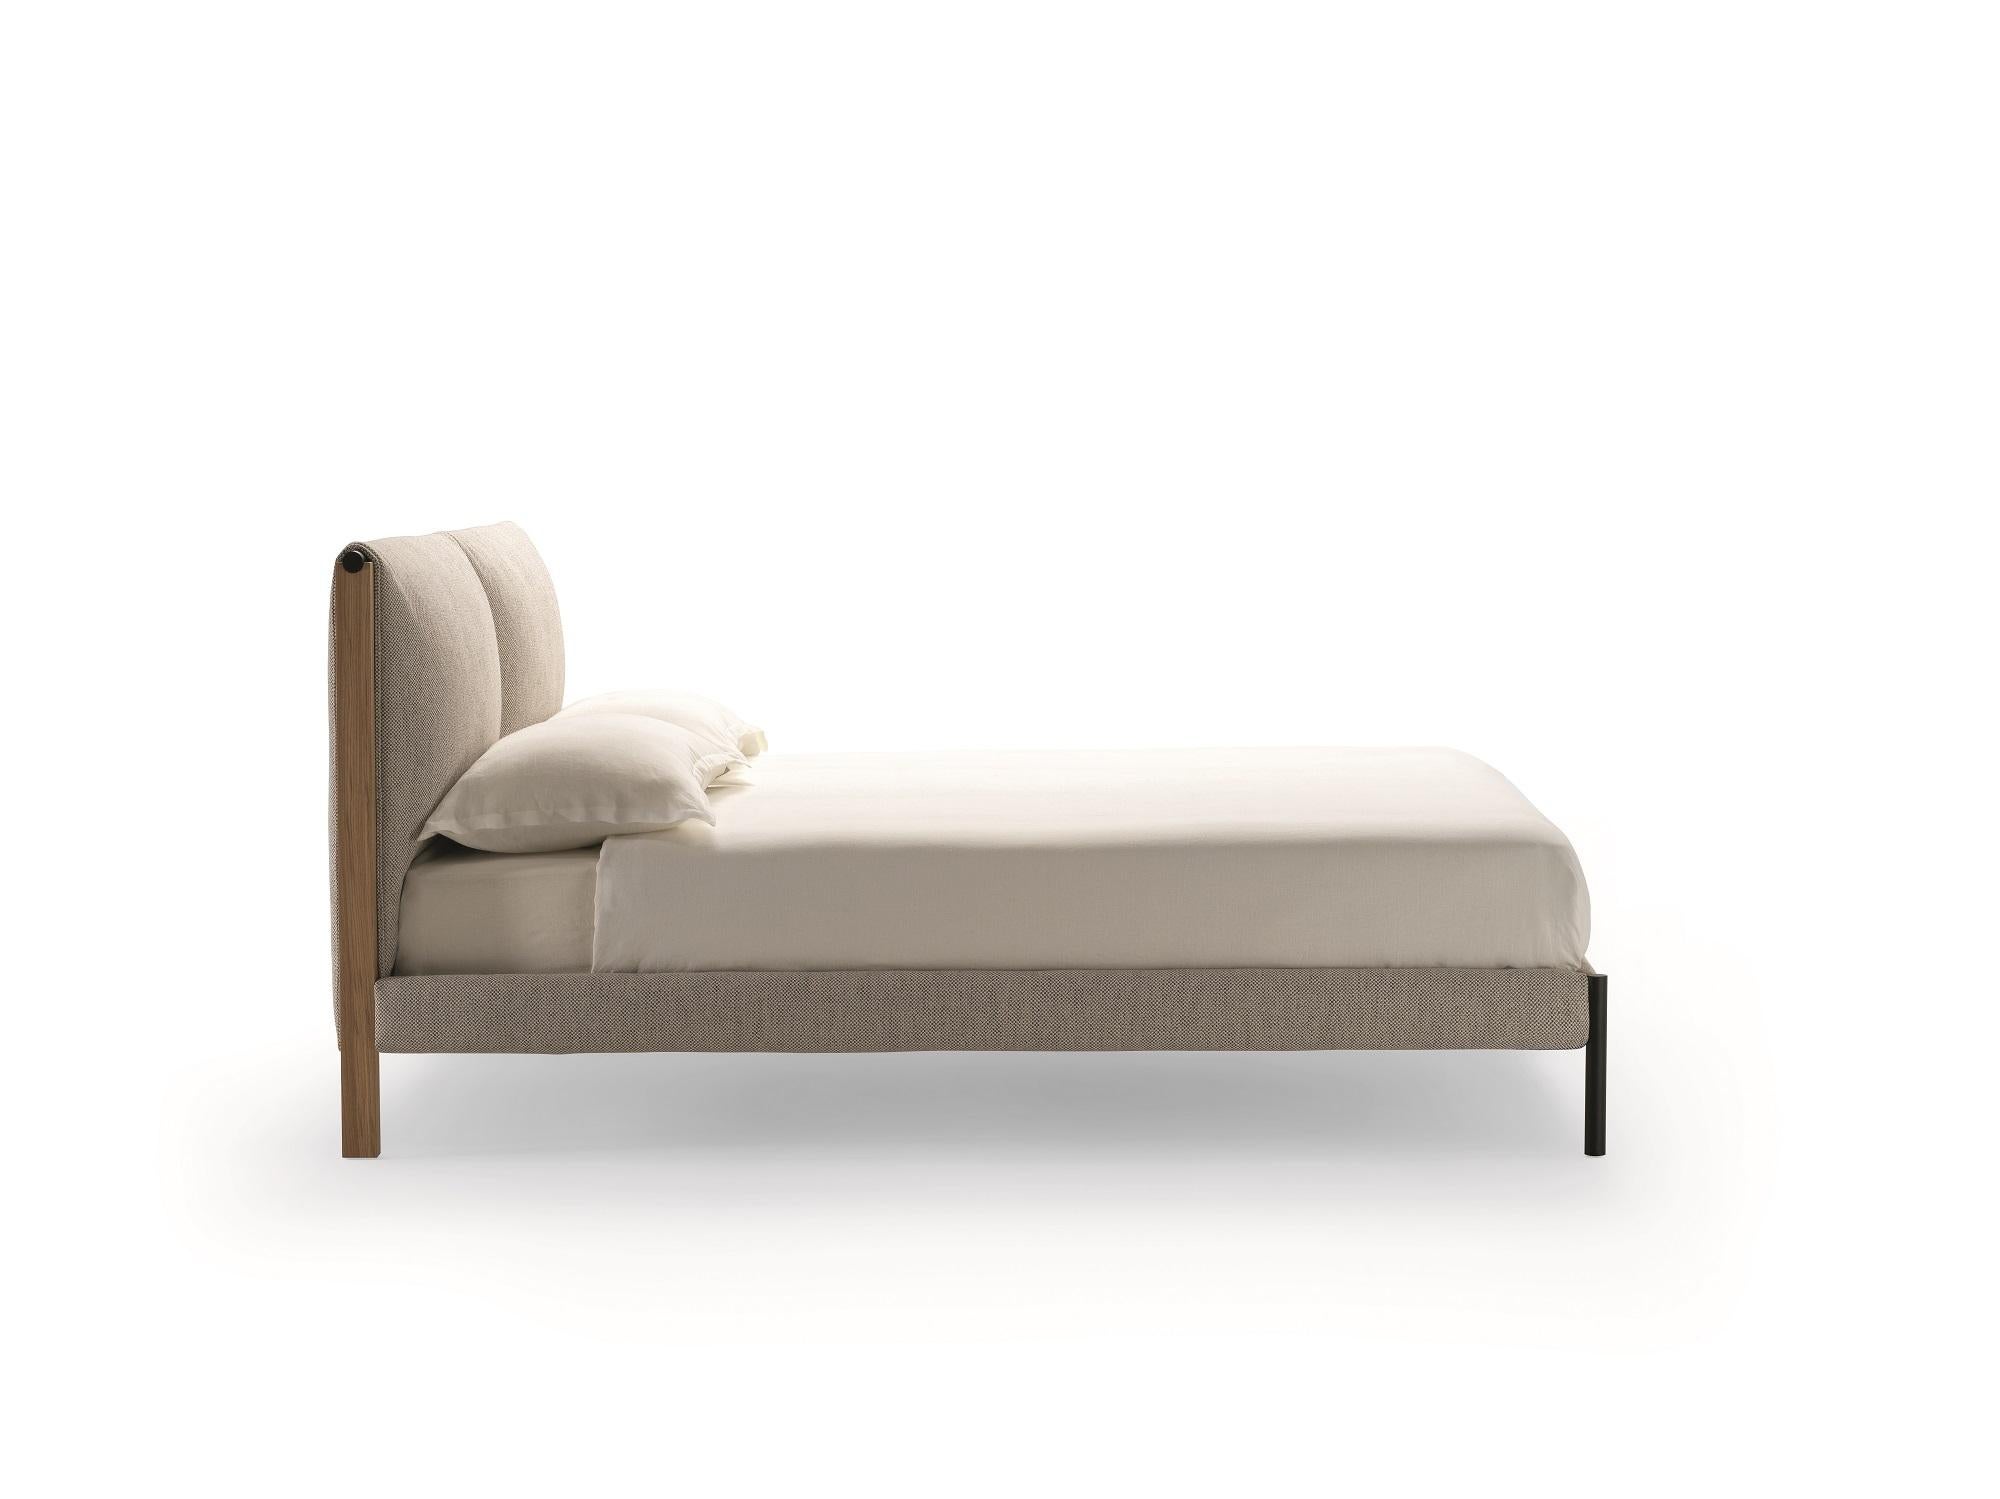 Zanotta Large Ricordi Bed with Separate Springing in Toce Upholstery by Spalvieri & Del Ciotto

Bed with separate springing. Headboard frame in natural or in open pore black painted oak. Upholstery in polyurethane/heat-bound polyester fibre. Front